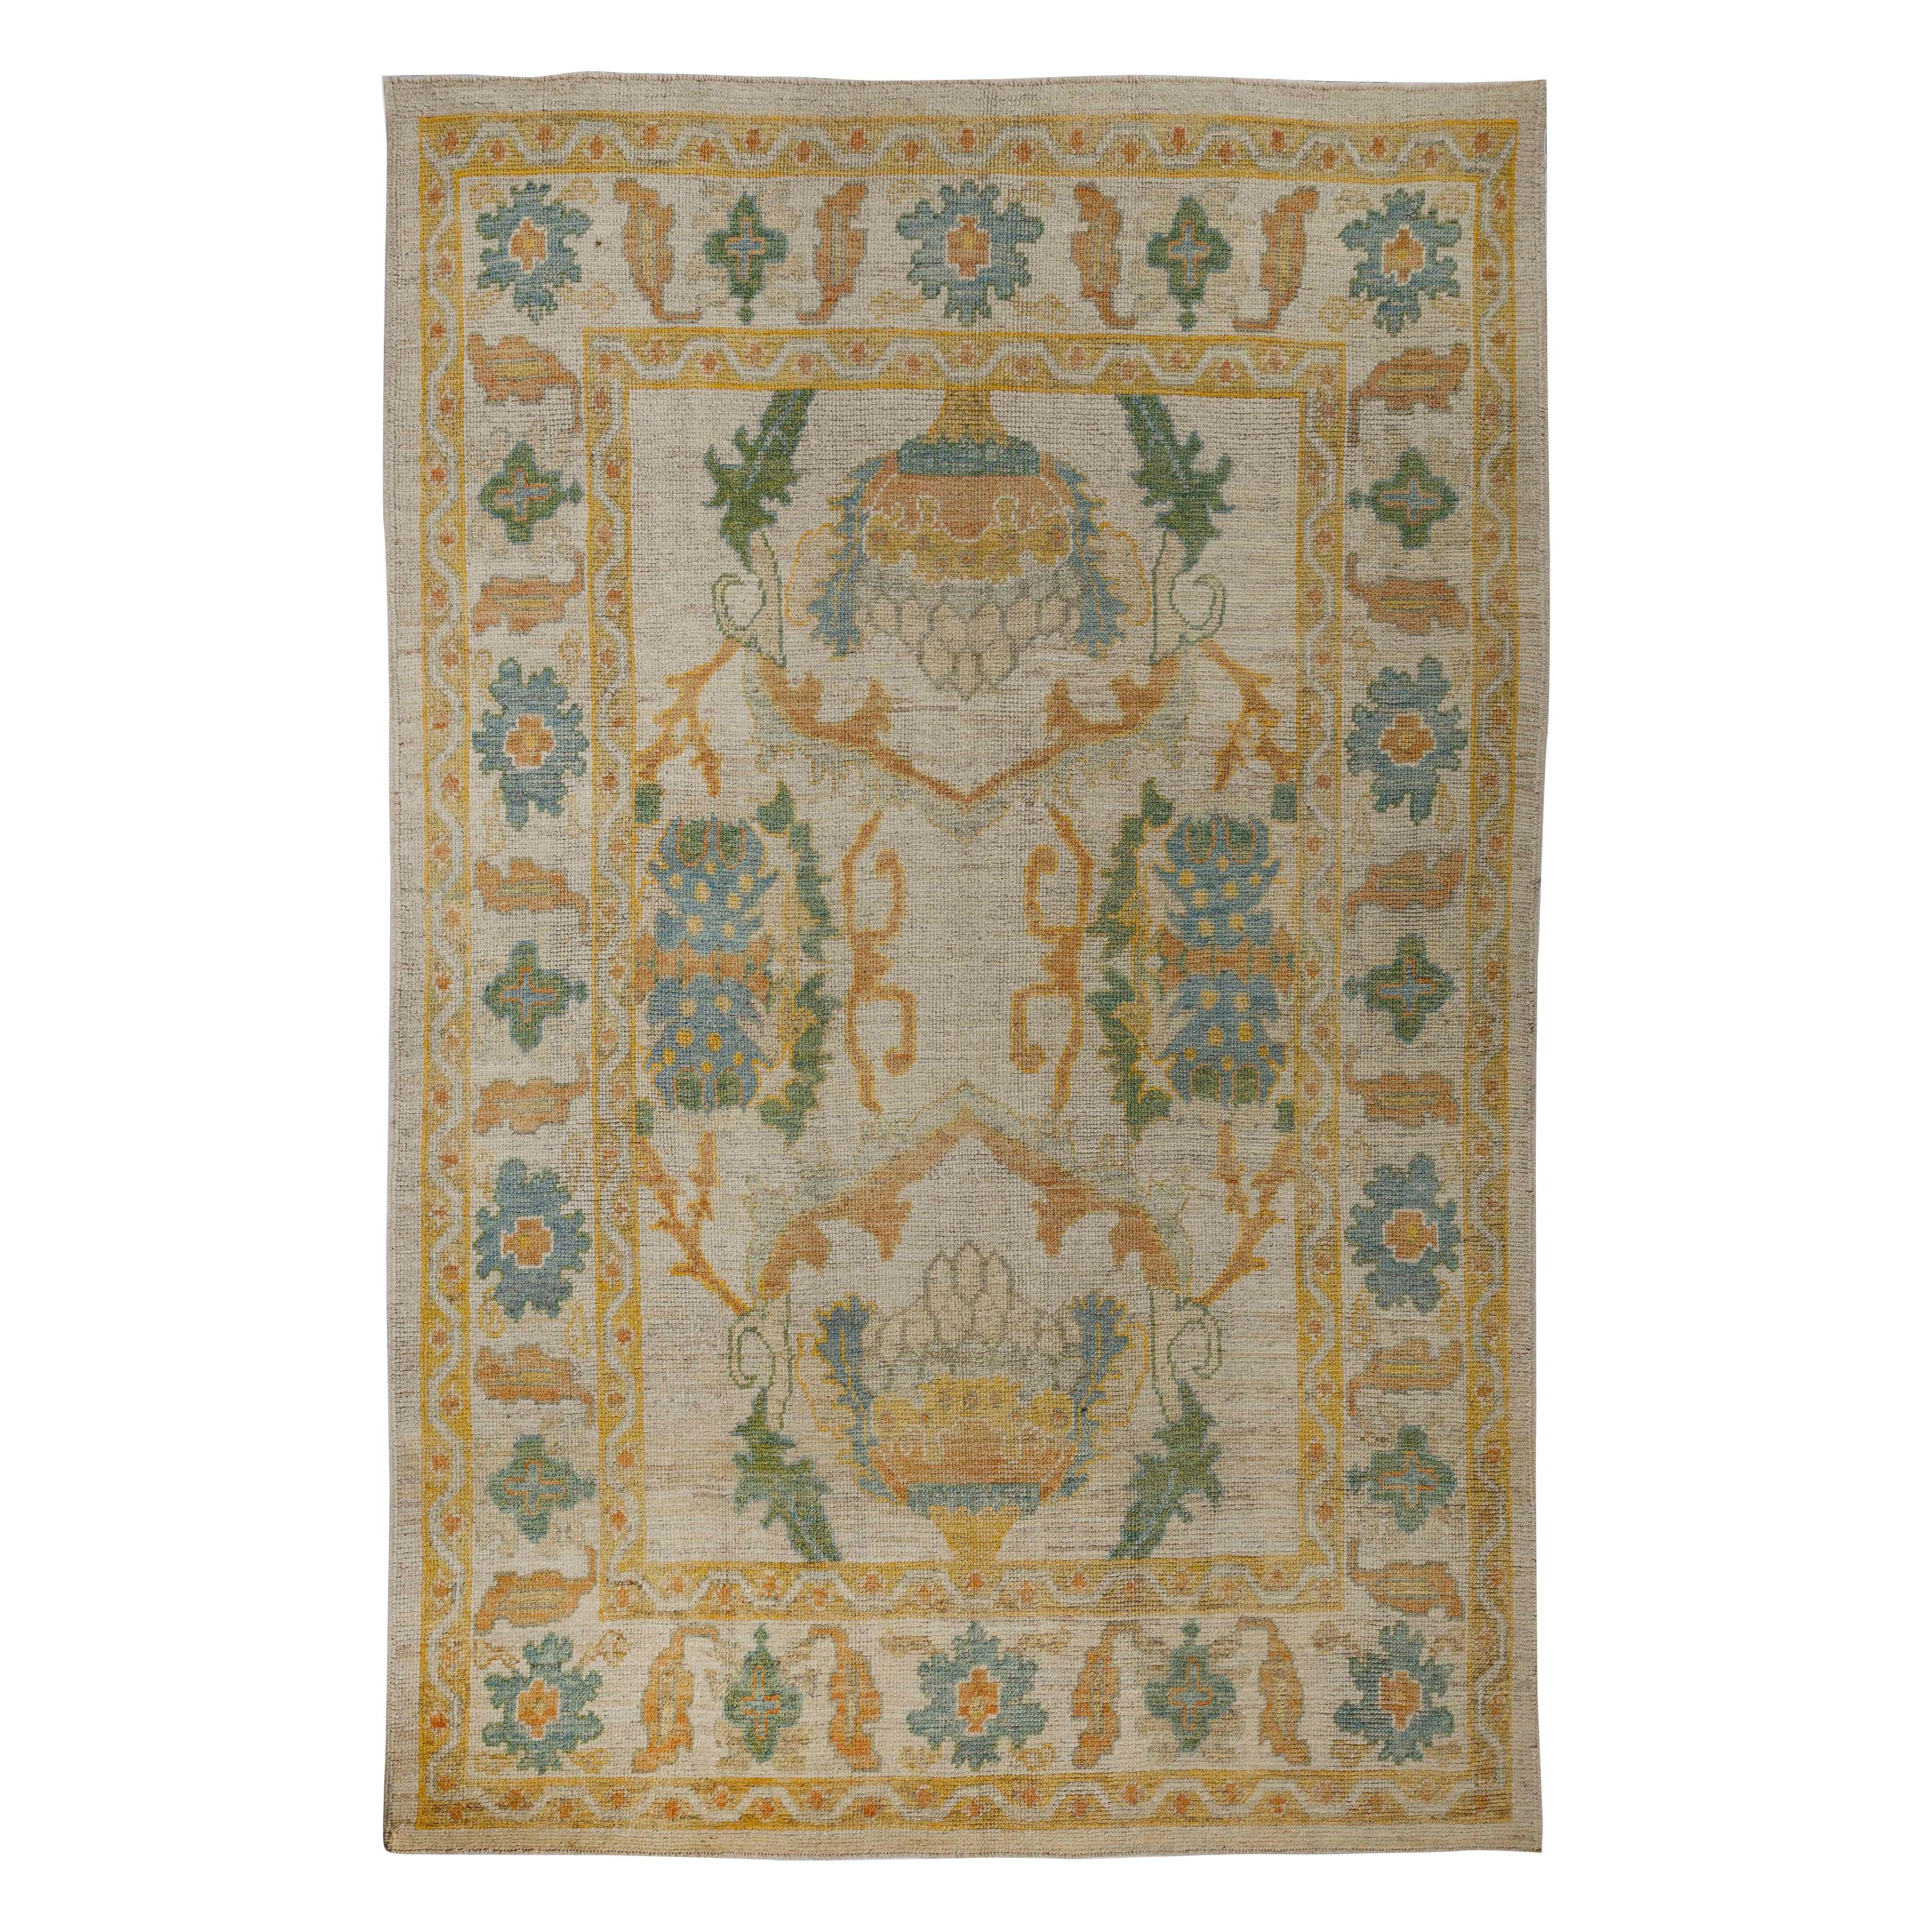 Contemporary Turkish Oushak Rug with Green and Blue Floral Design For Sale